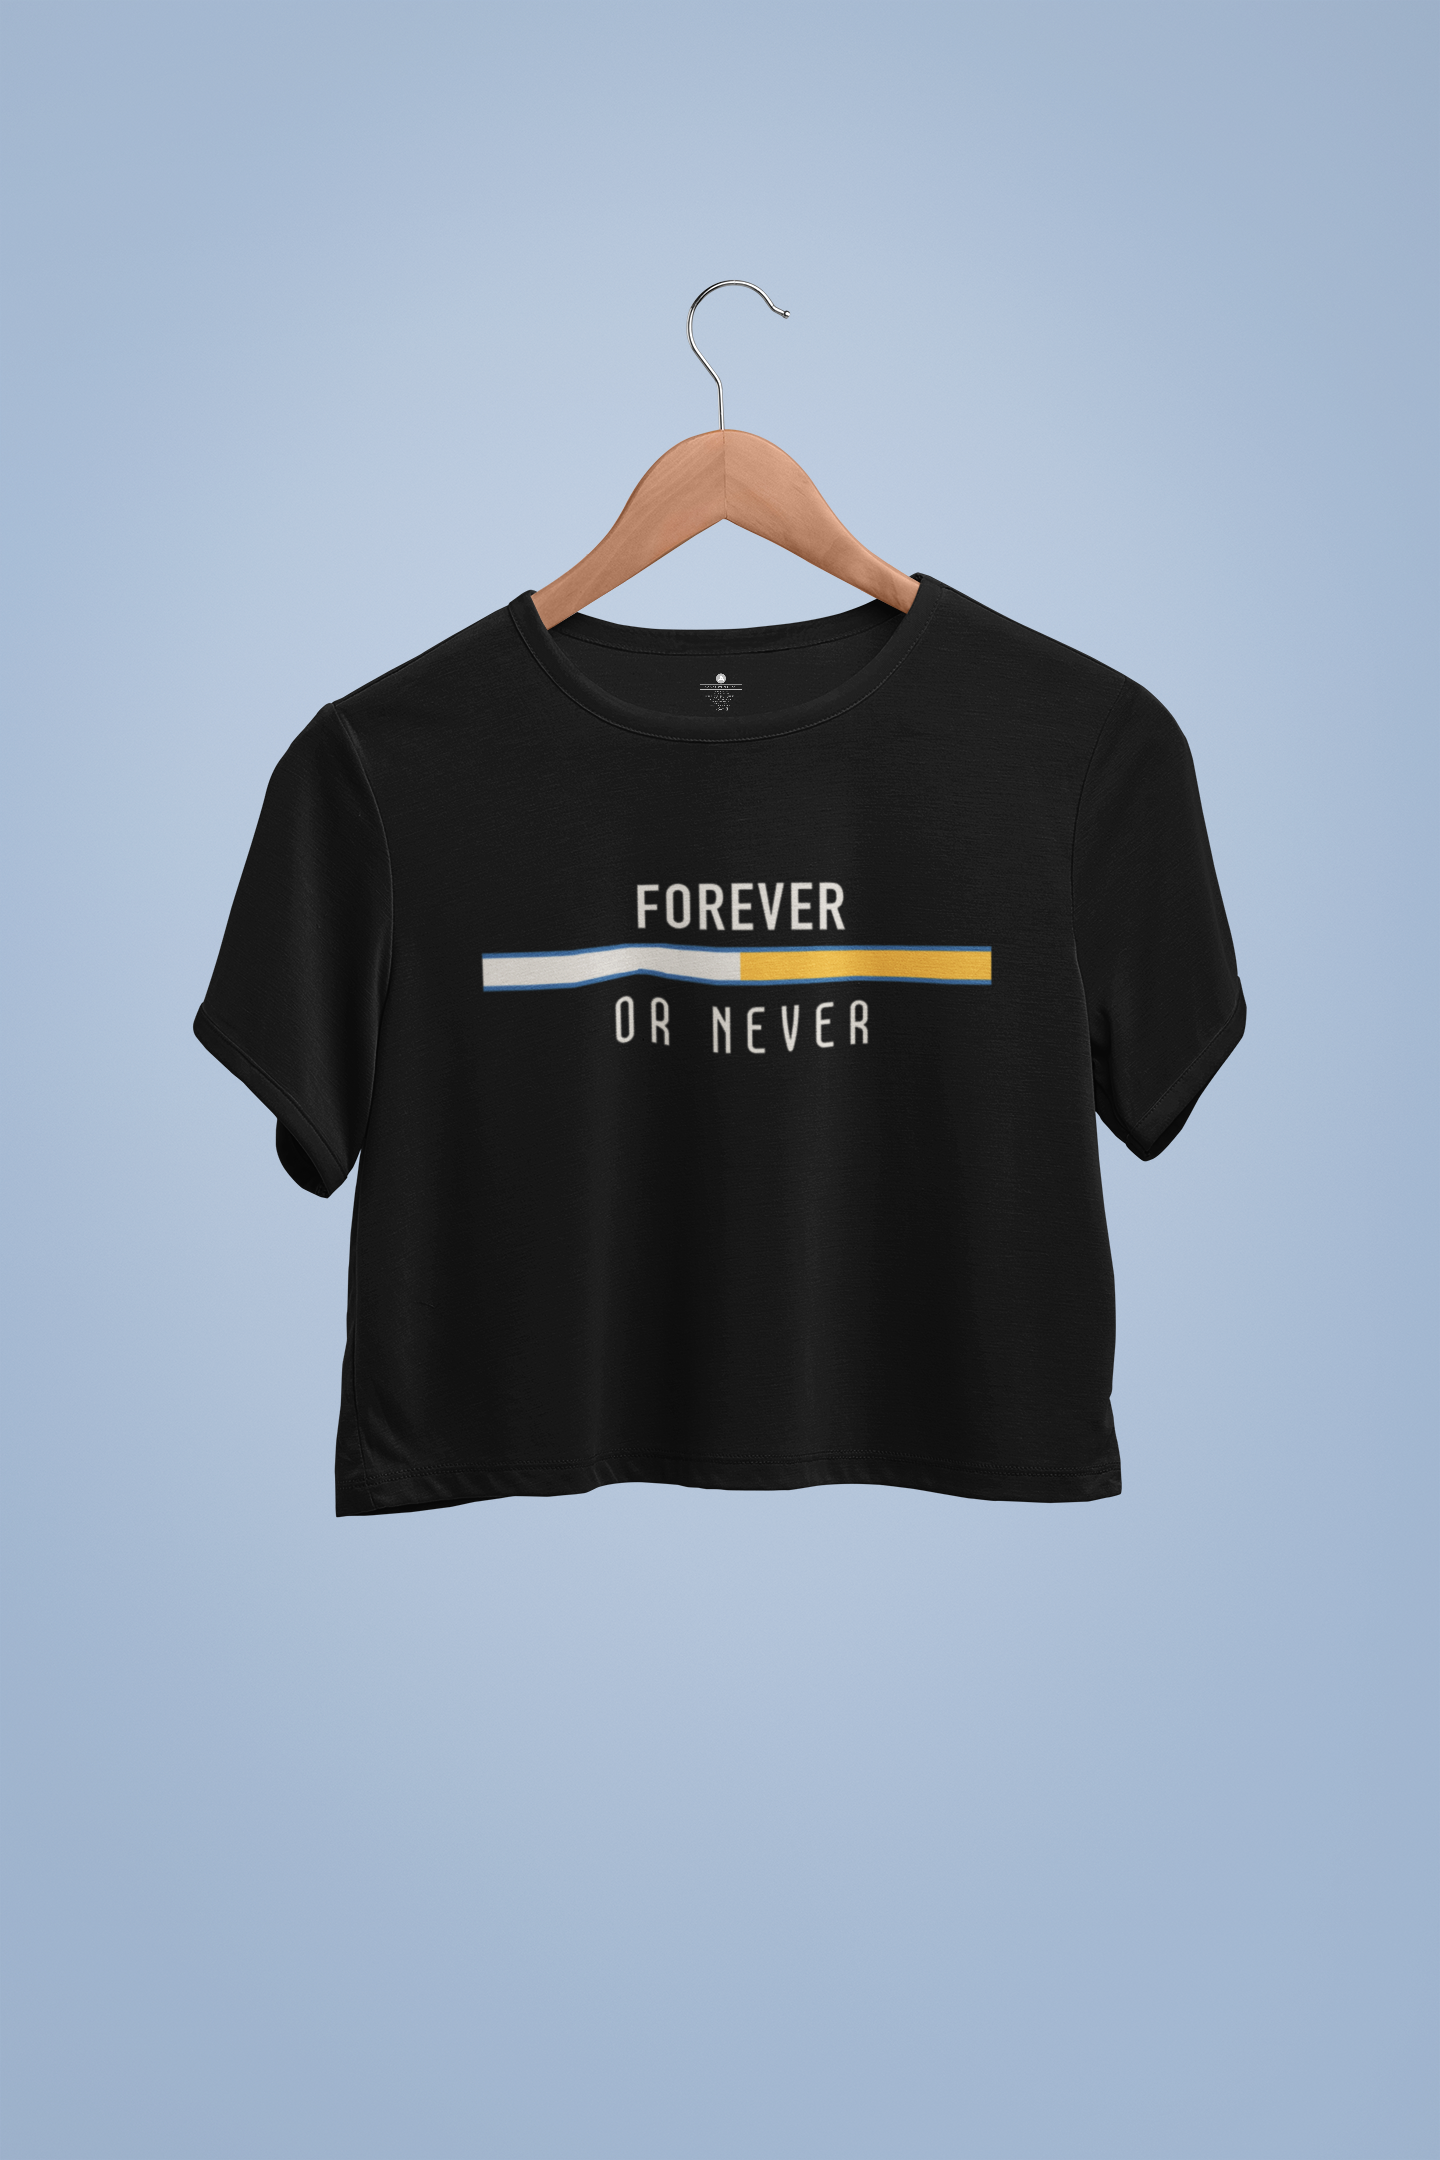 FOREVER OR NEVER -HALF-SLEEVE CROP TOPS